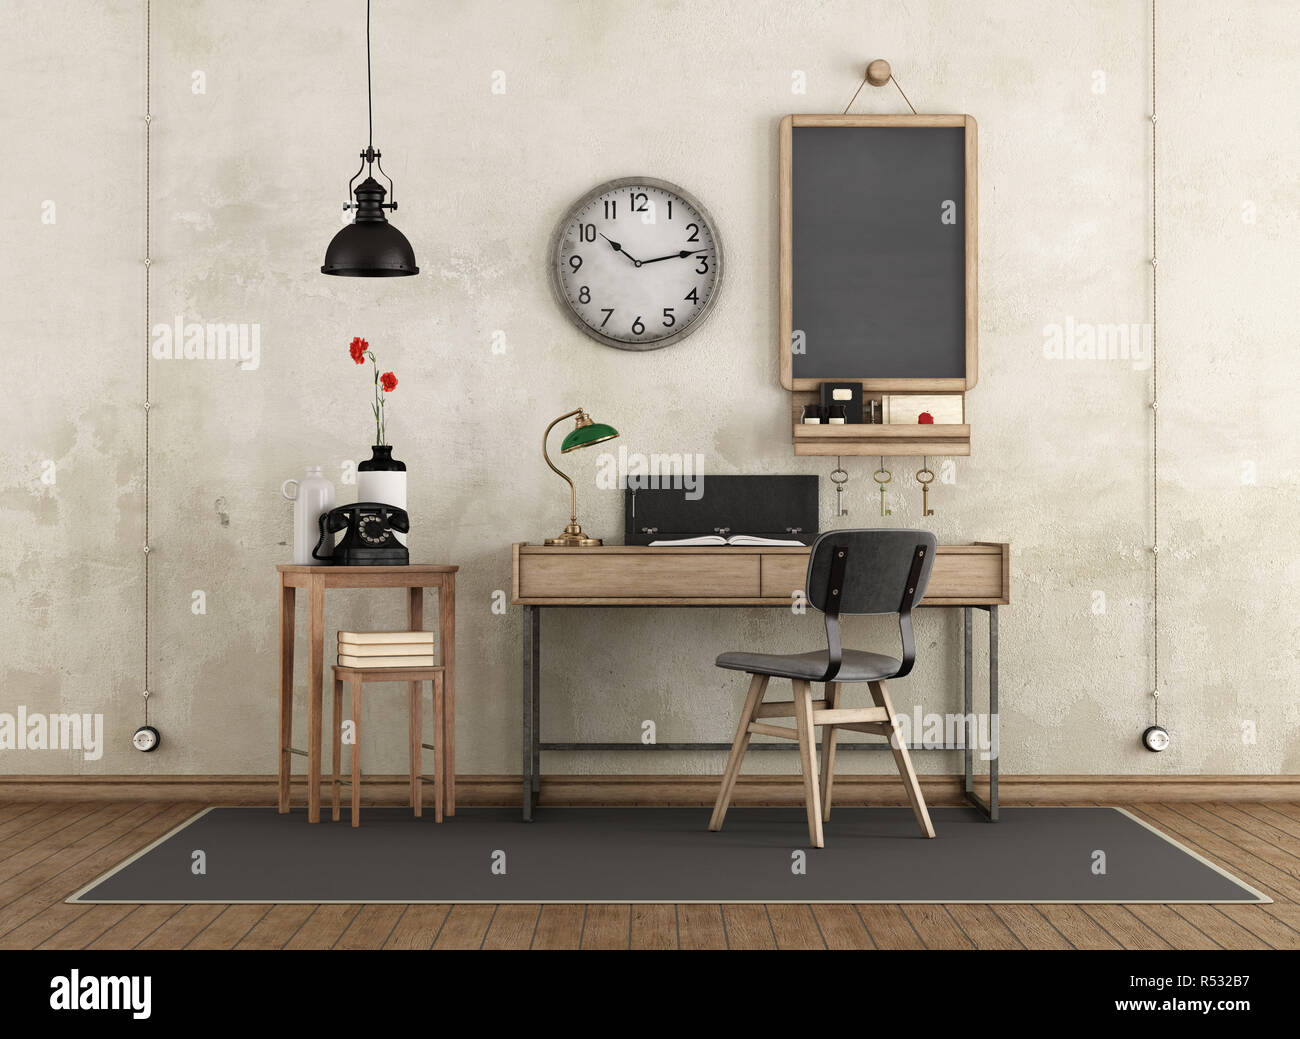 Home workspace in industrial style Stock Photo